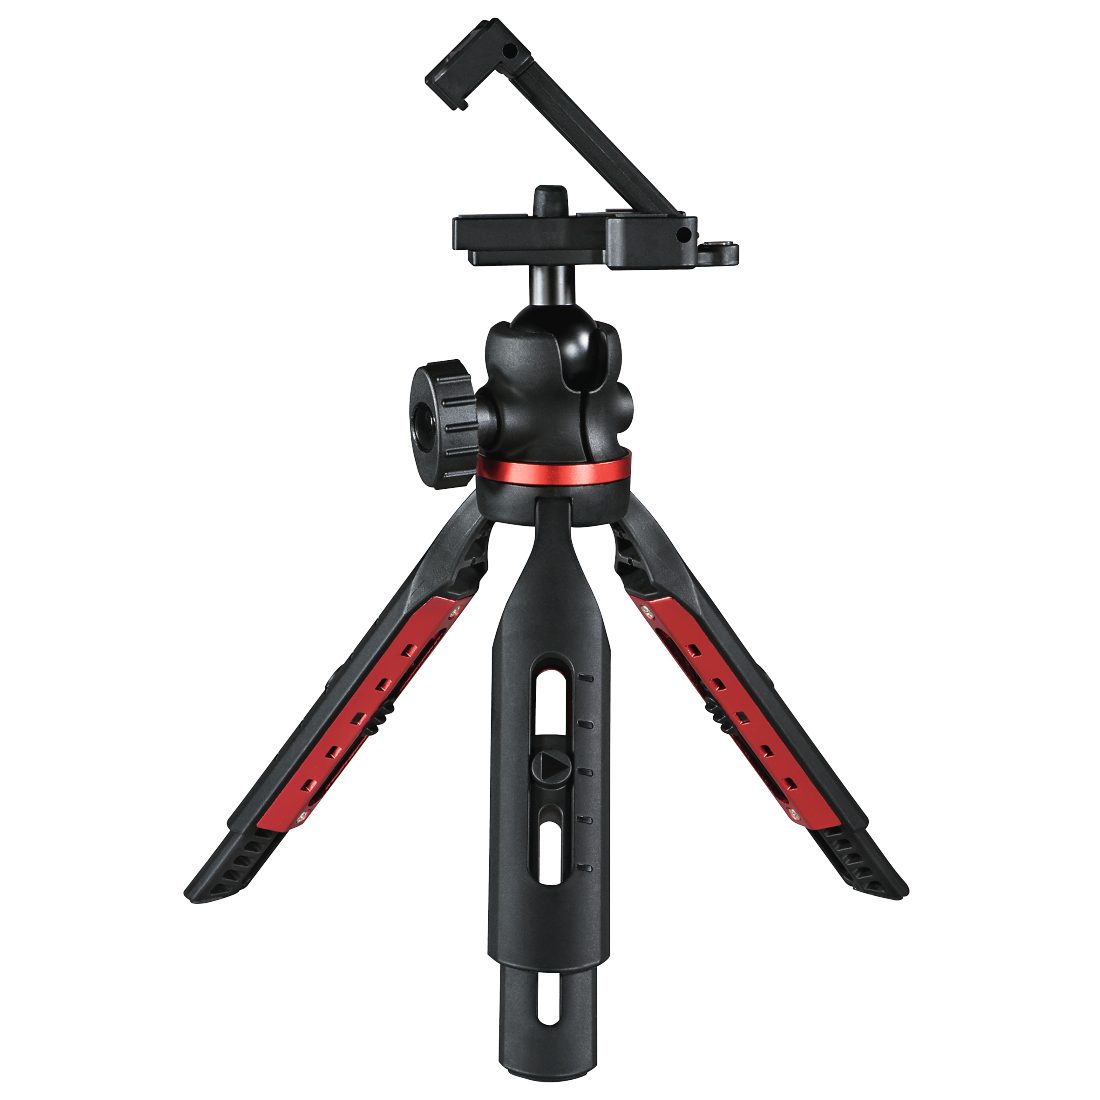 HAMA Solid Table Tripod for Smartphones and Photo Cameras, 19B - Black